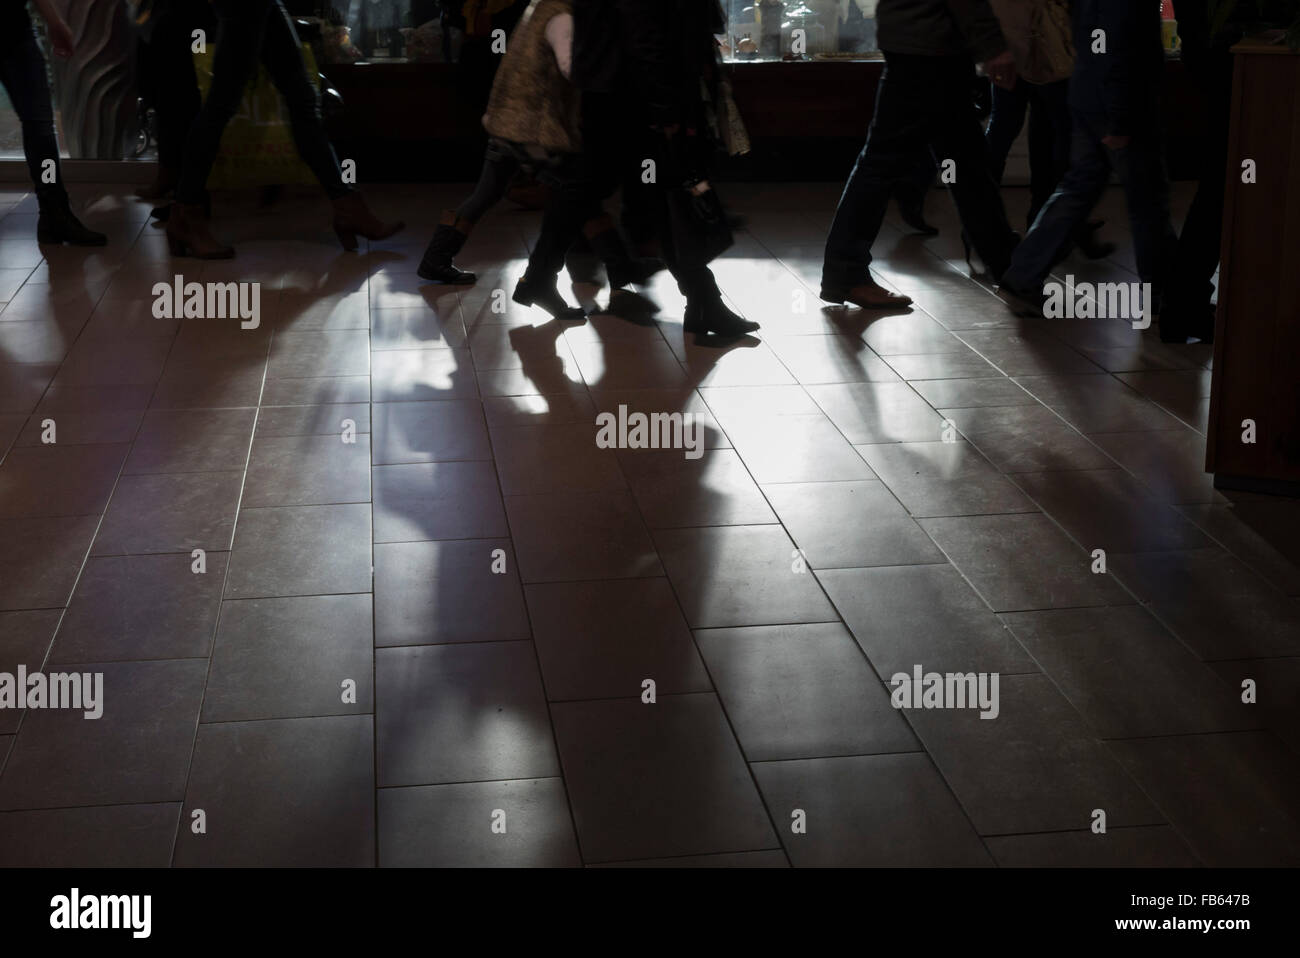 Retail footfall - photographed at Meadowhall shopping centre, Sheffield, UK Stock Photo